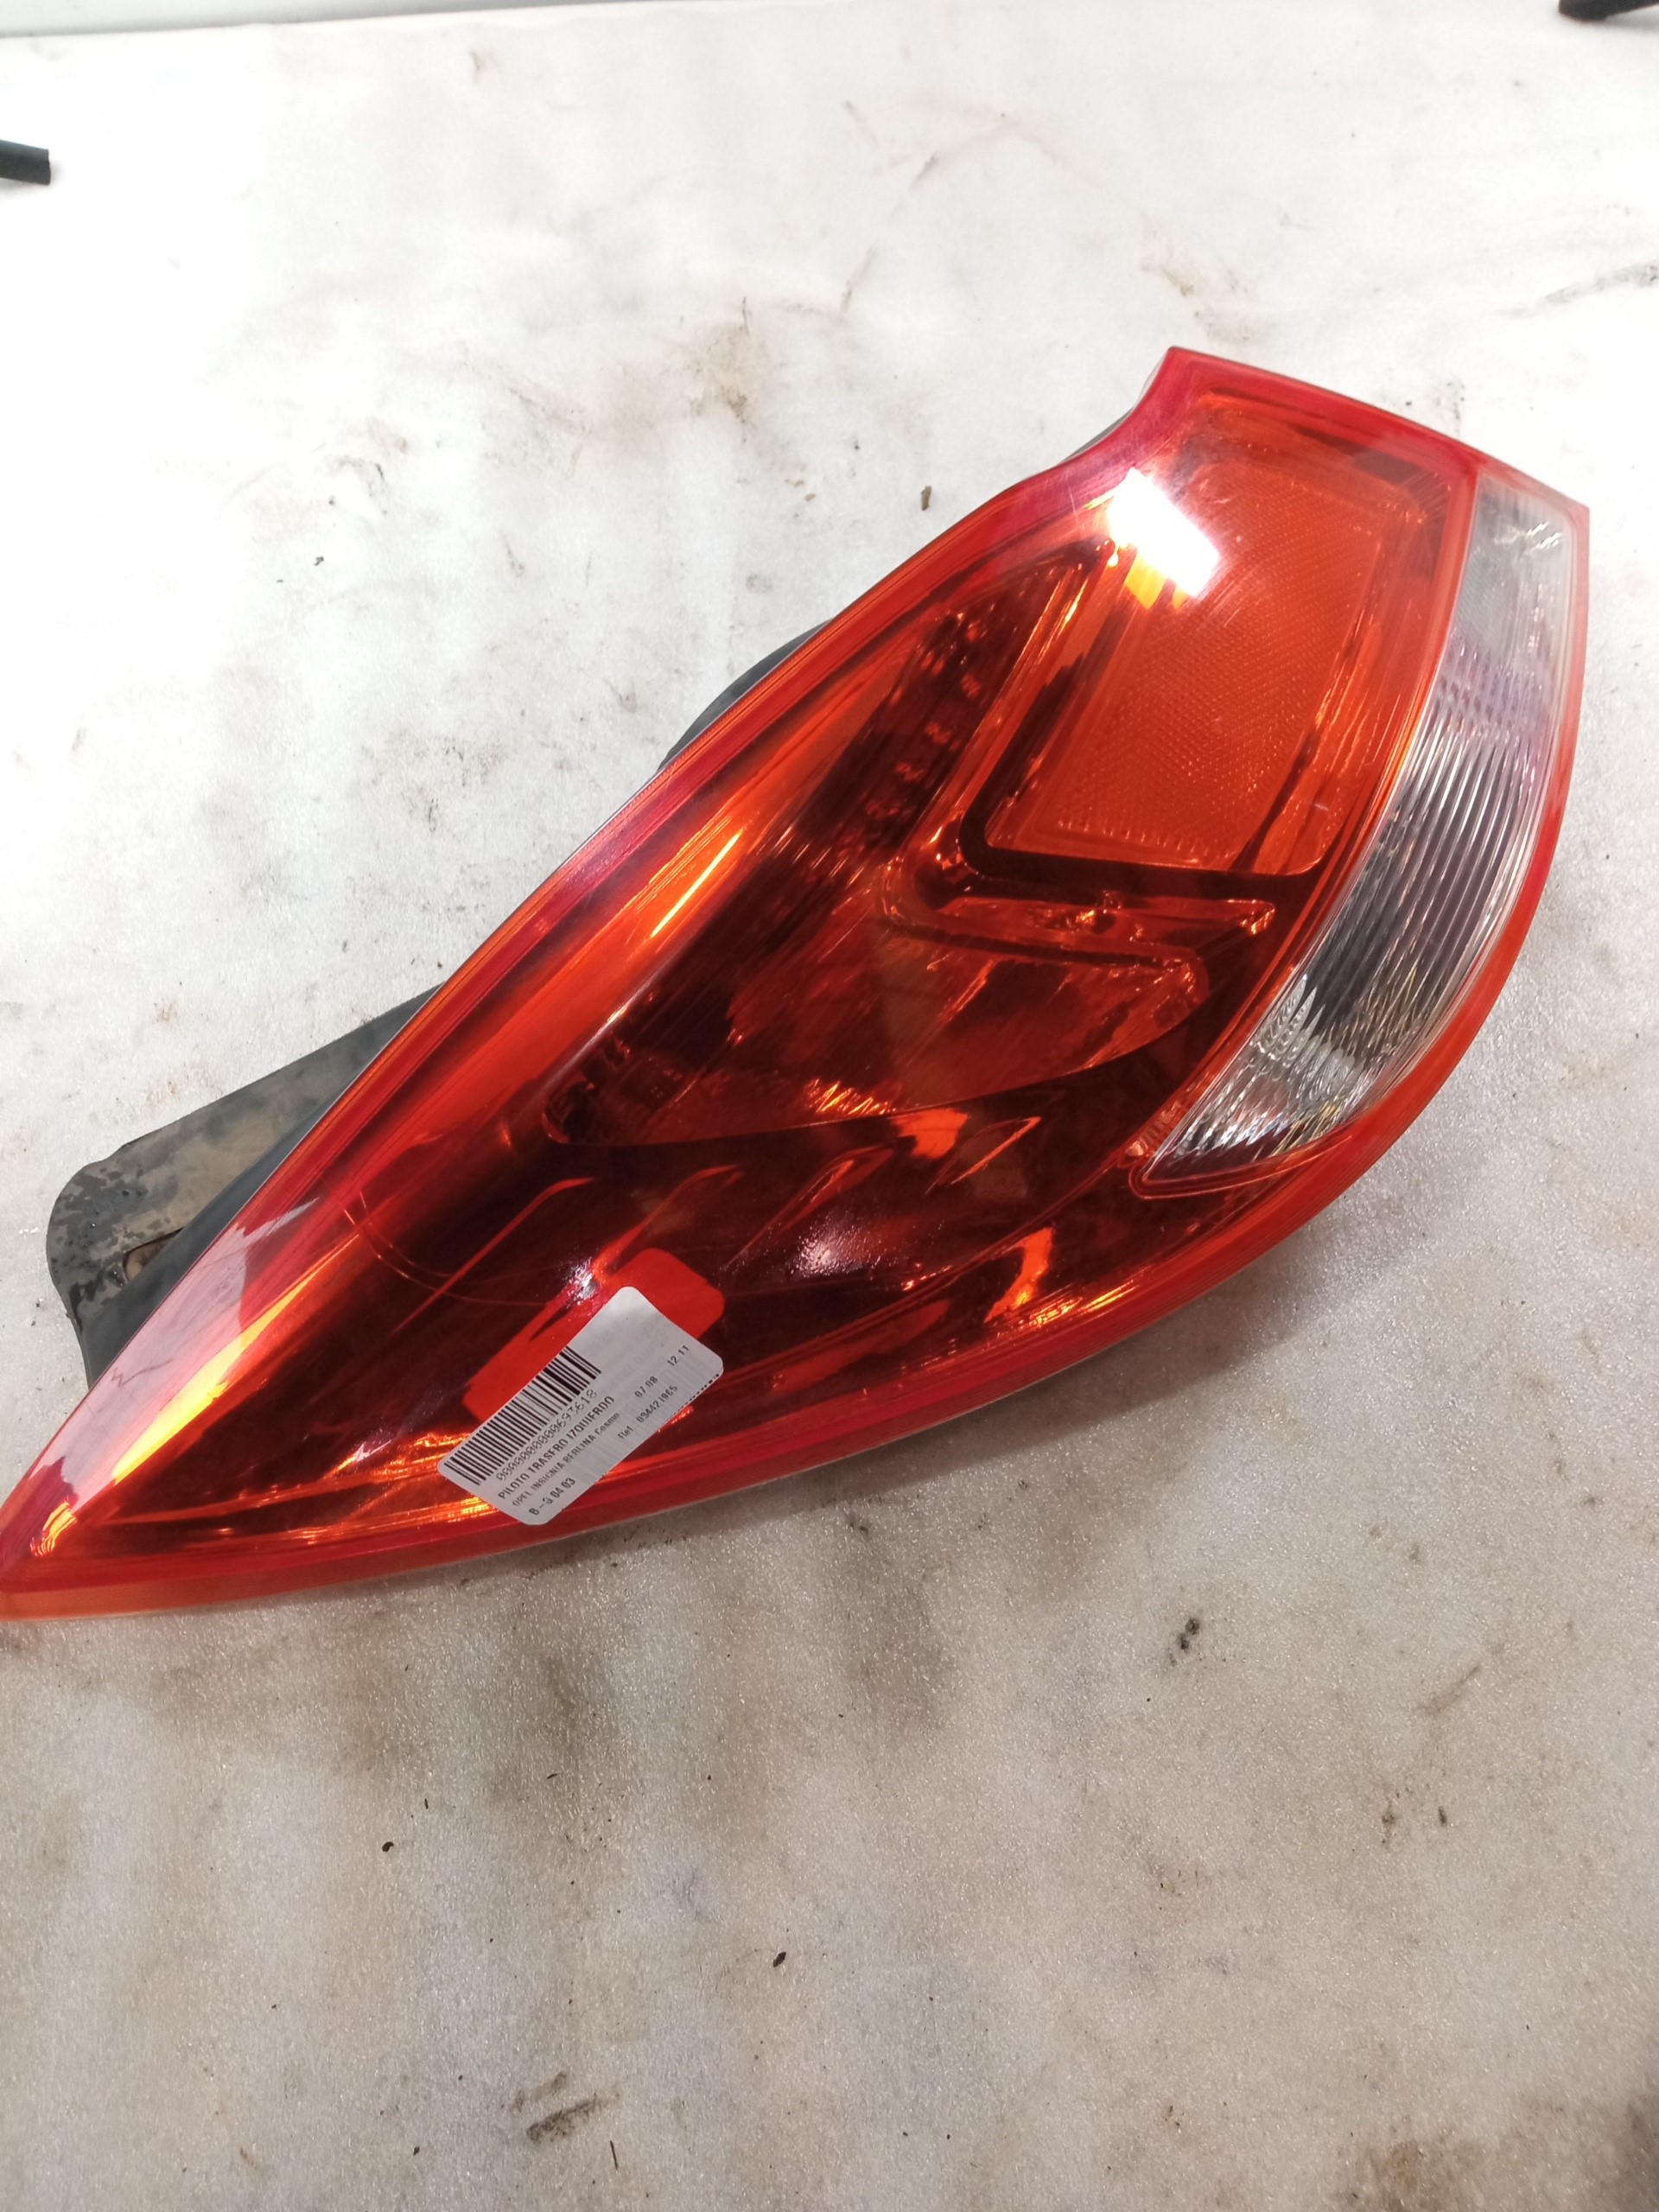 OPEL Insignia A (2008-2016) Rear Left Taillight 084421965, 5PINES 25220339